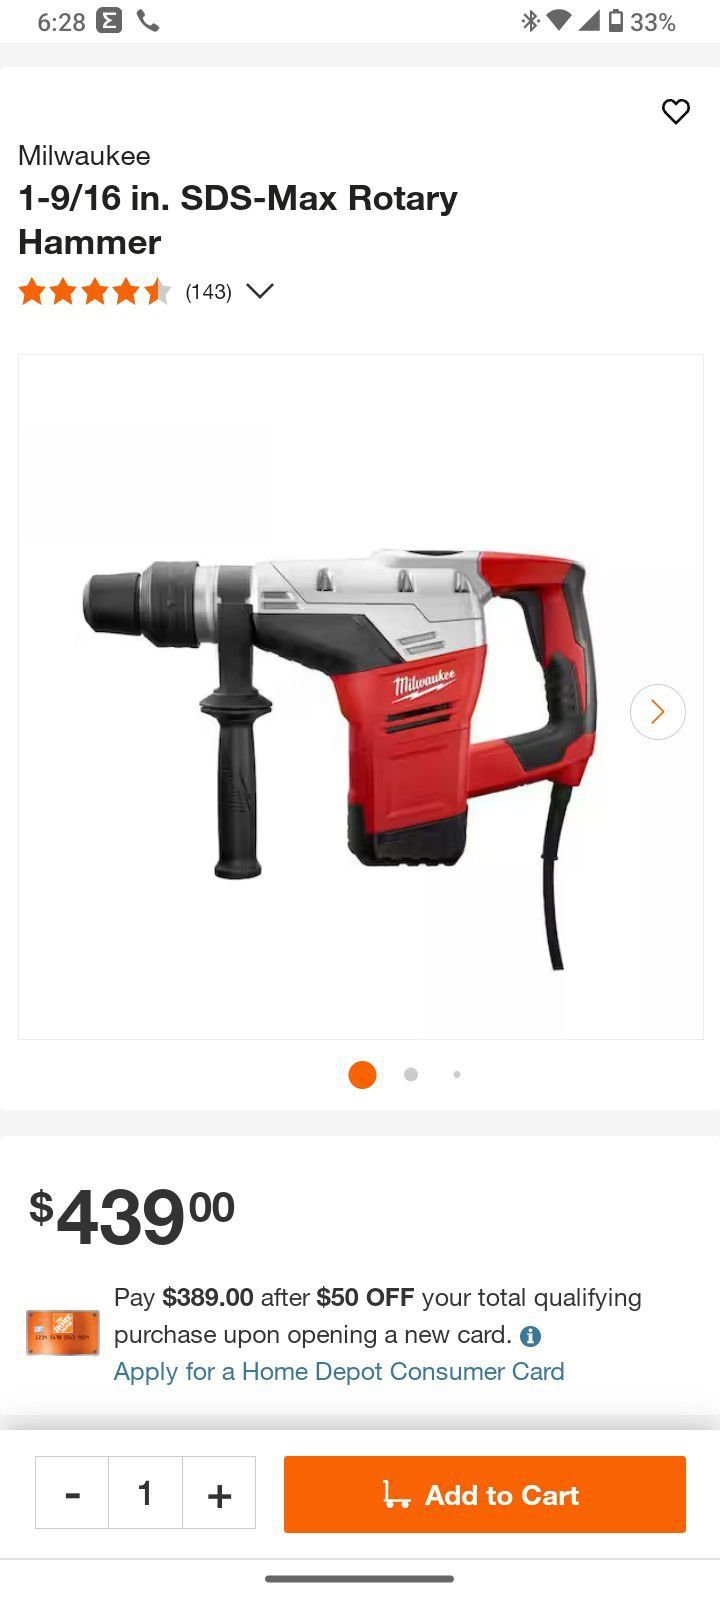 Milwaukee

1-9/16 in. SDS-Max Rotary Hammer

